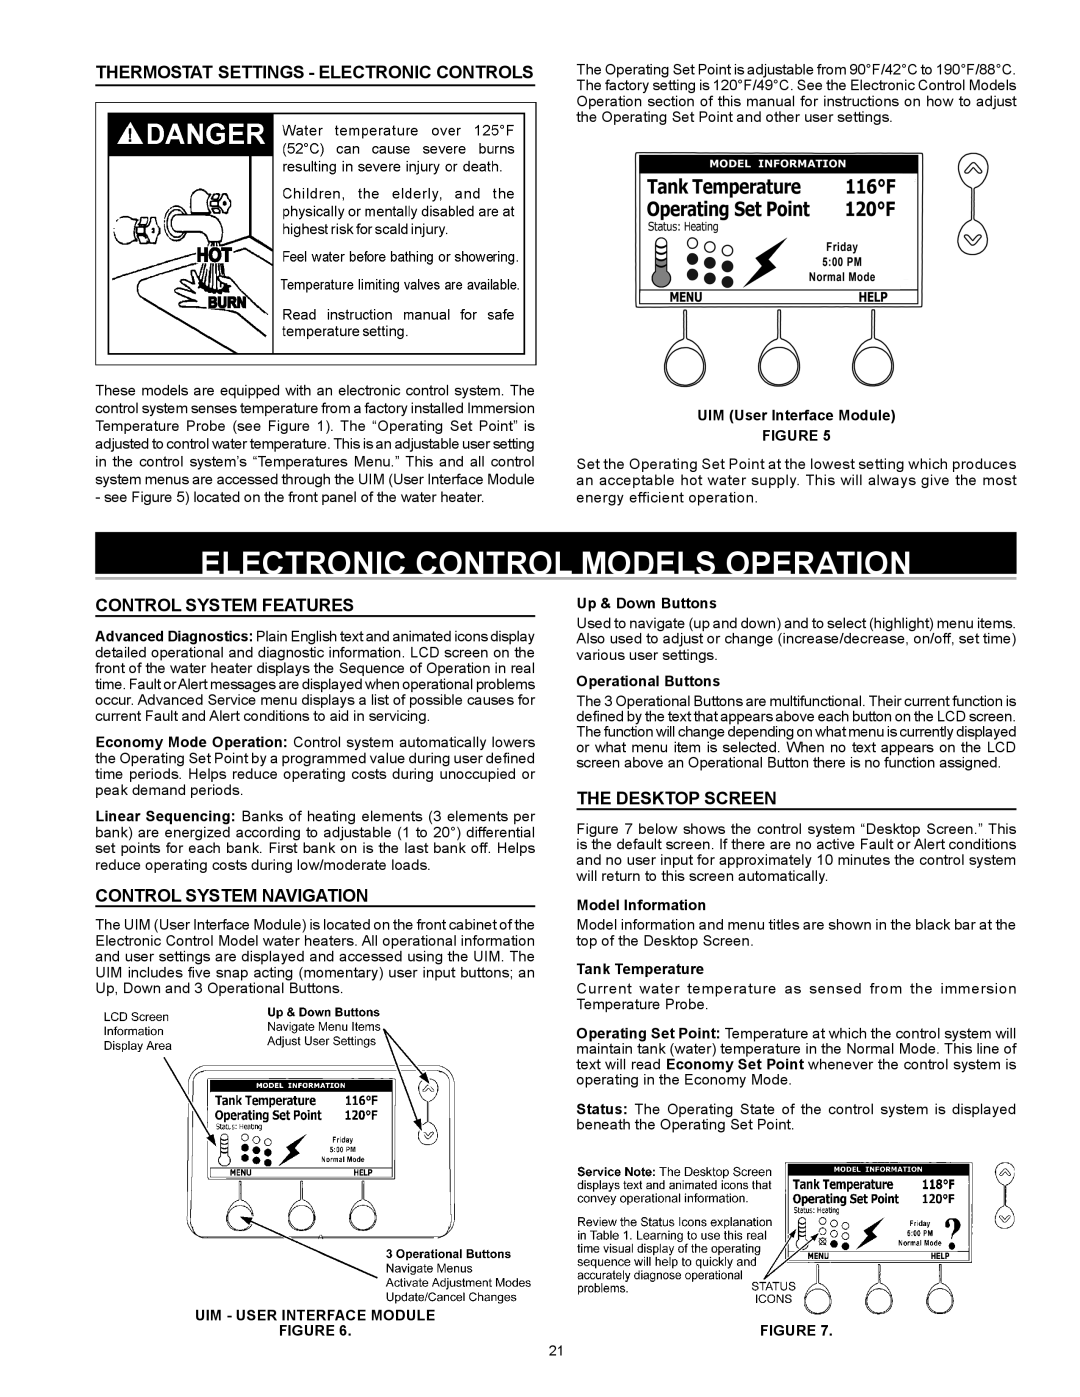 A.O. Smith Dve-52/80/120 Electronic Control Models Operation, THERMOSTAT SETTINGS - electronic CONTROLs, Up & Down Buttons 